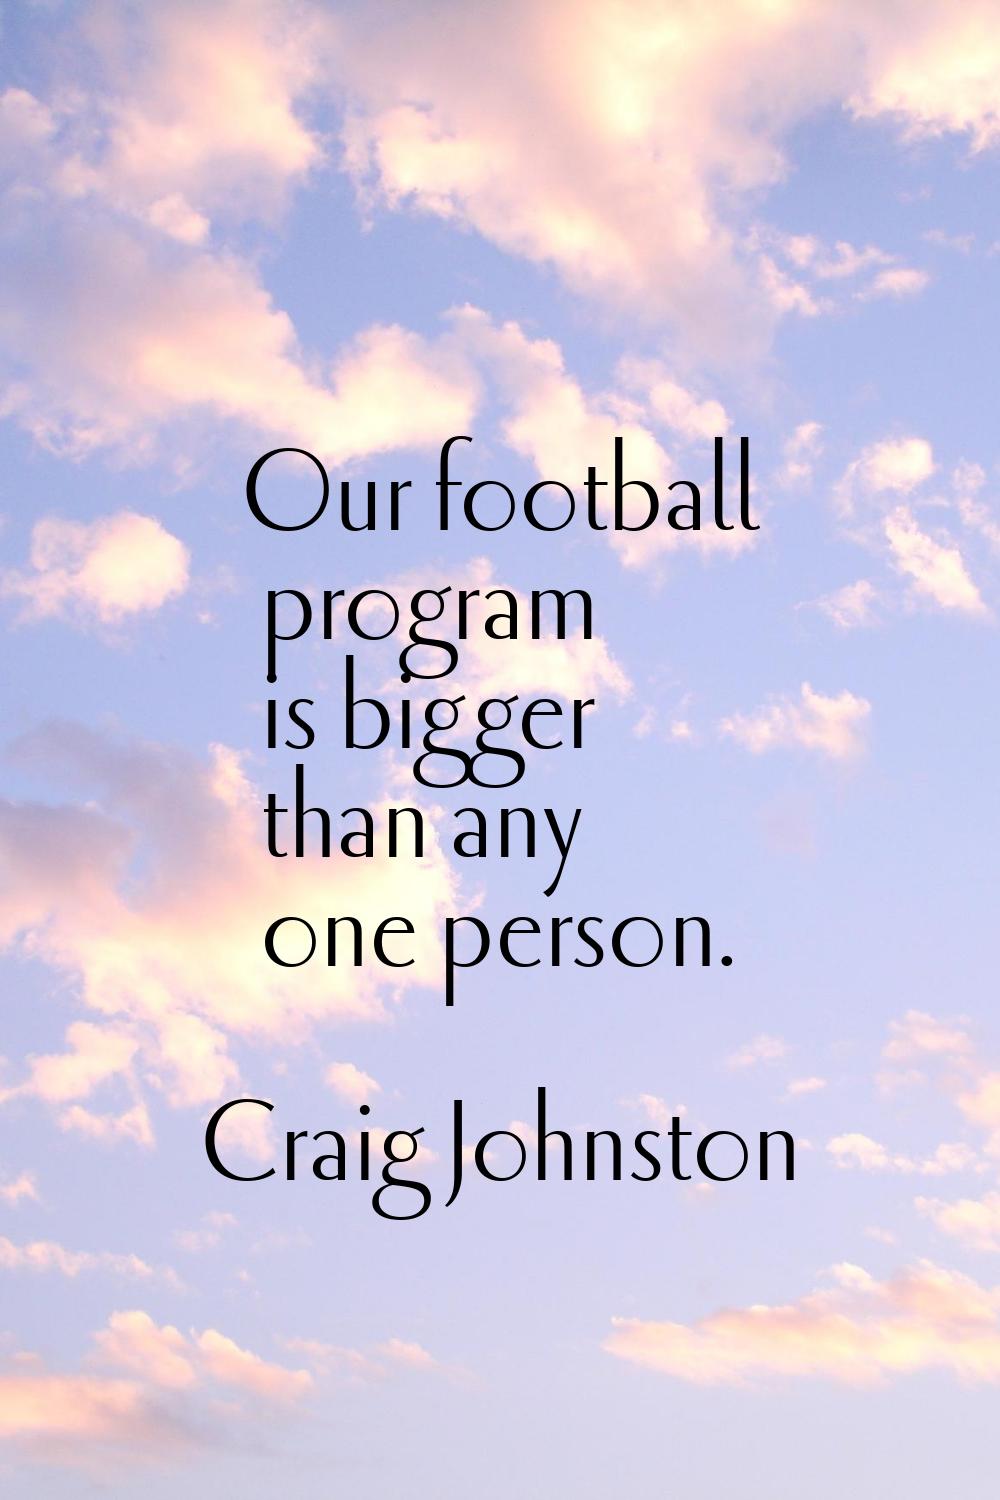 Our football program is bigger than any one person.